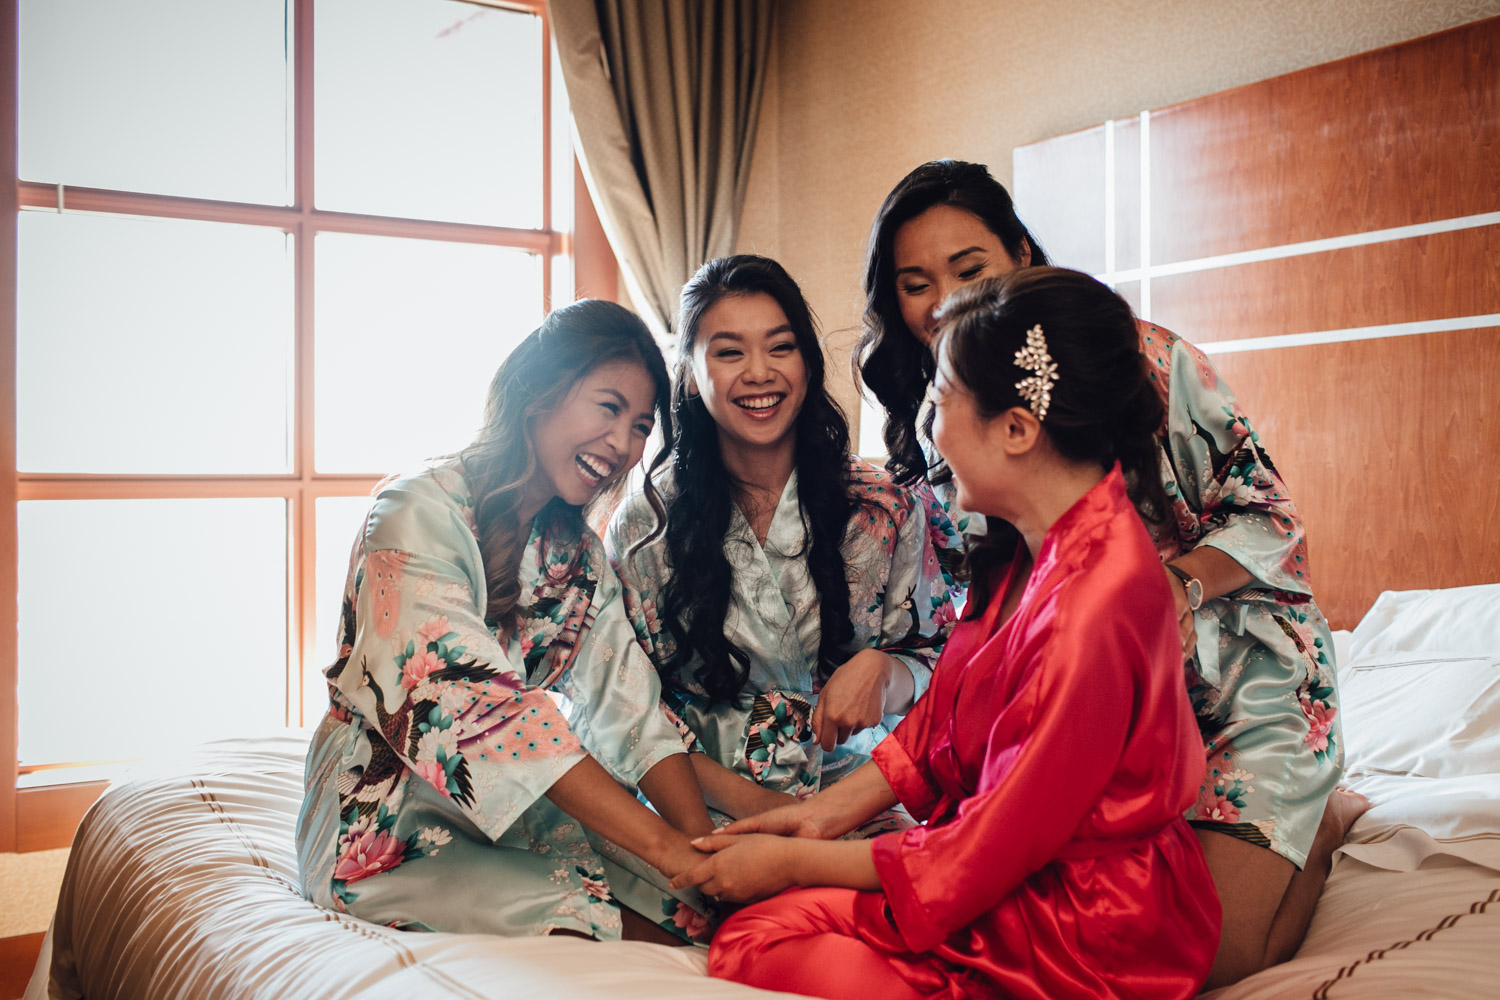 bride and bridesmaids river rock casino hotel bed candid wedding photography